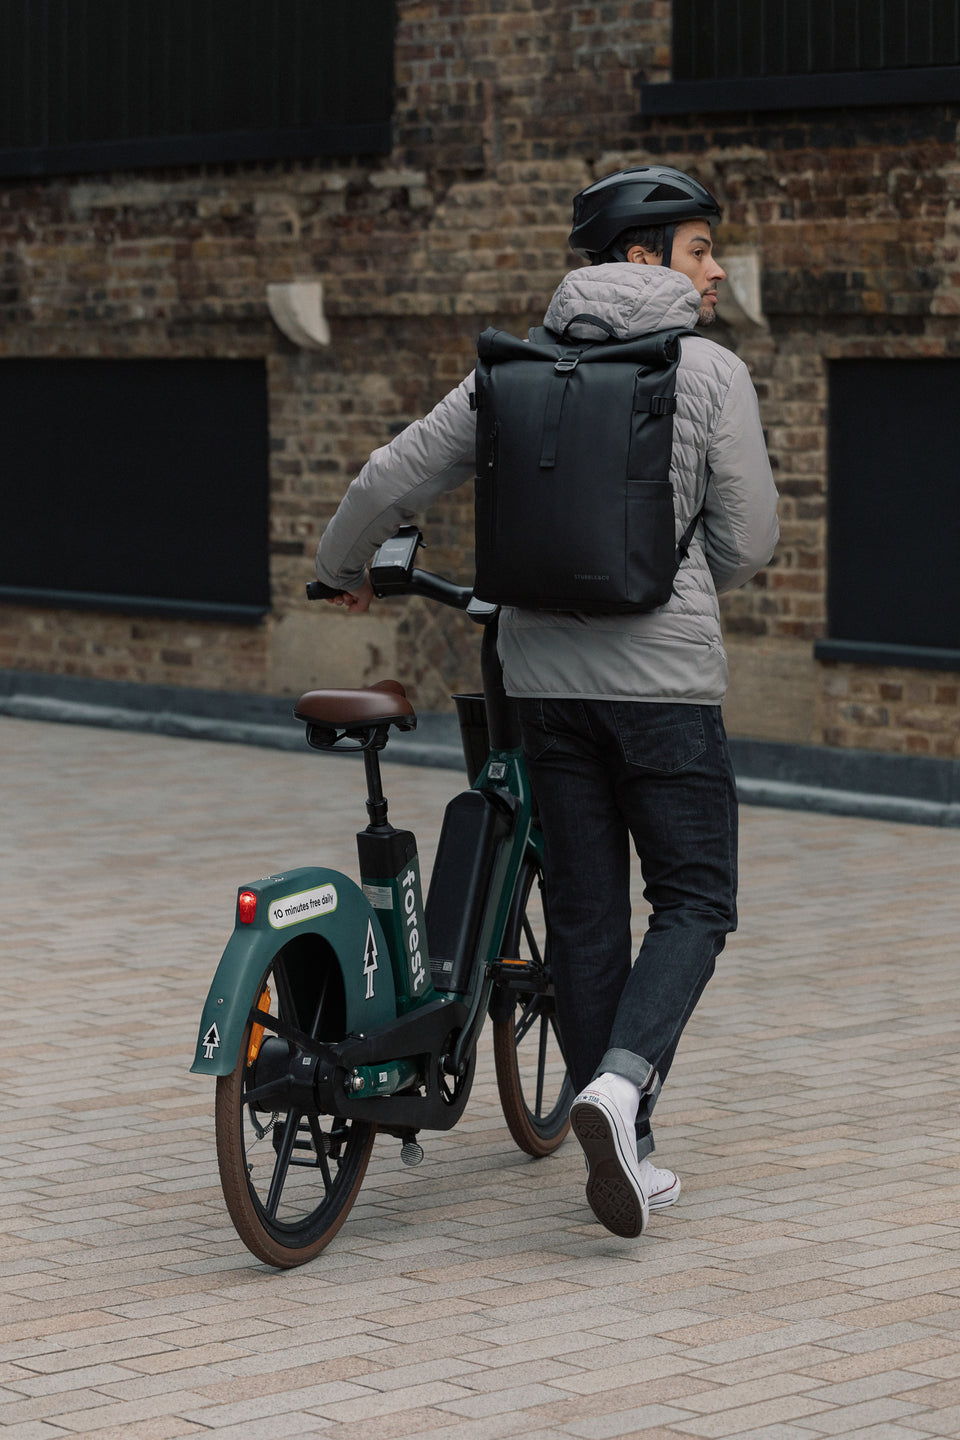 A man pushing an e-bike down the street whilst wearing a black backpack on his back